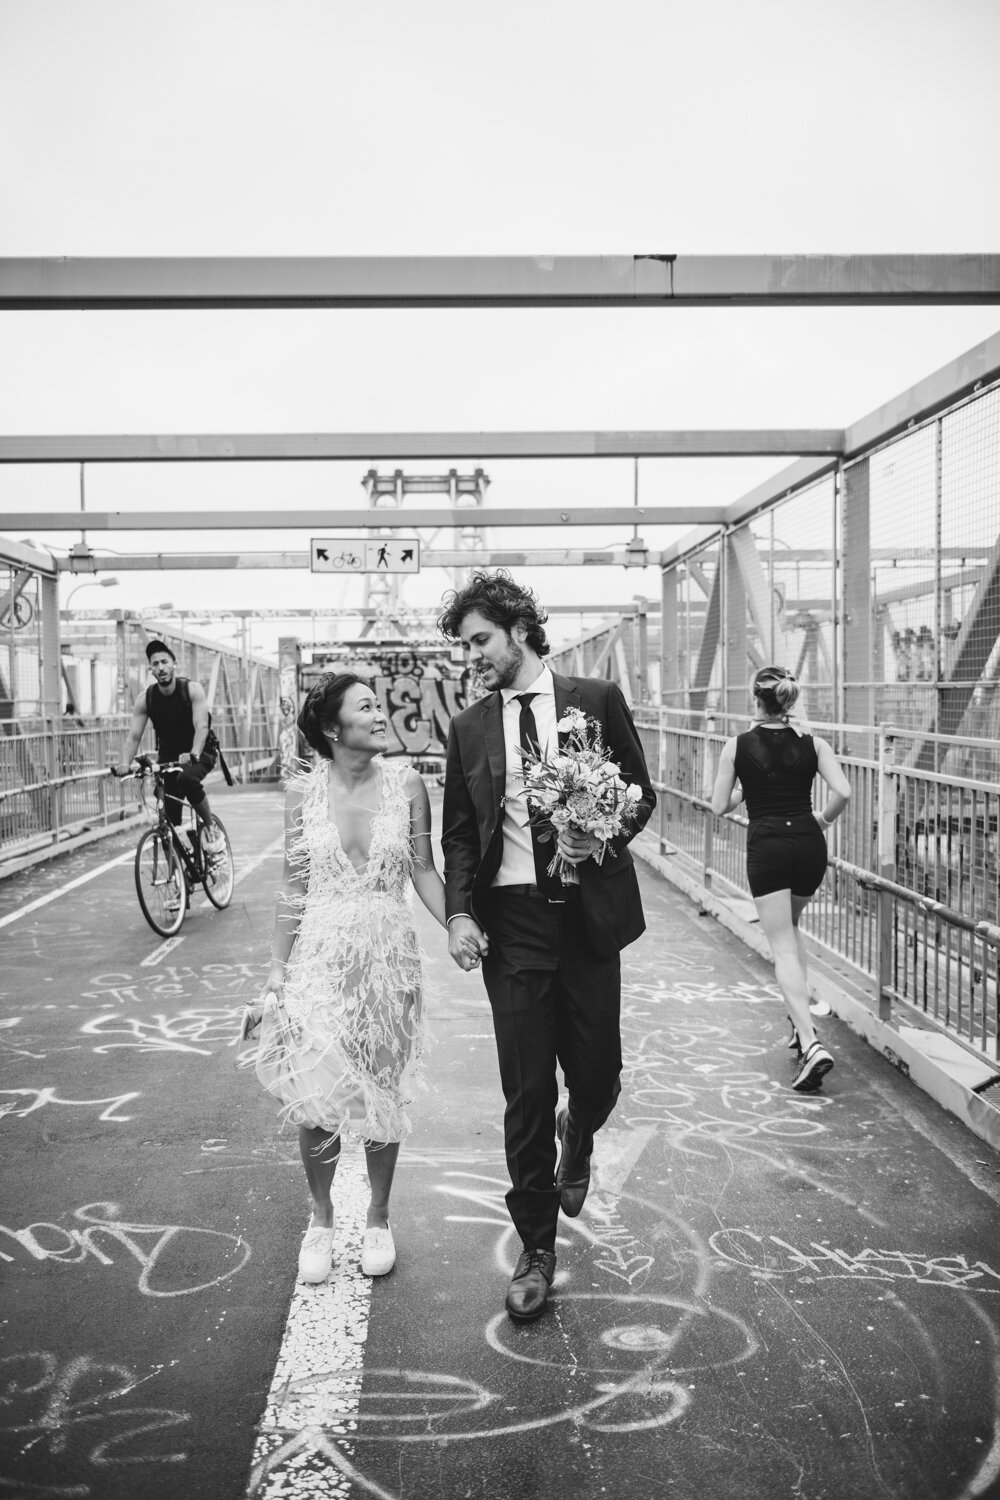 Bride and groom walk along the Williamsburg Bridge holding hands. The groom is holding the bride's flower bouquet as she is holding up the skirt of her feathered wedding dress in her hand. Runners and bicyclists pass them on the sides.

Central Park Wedding Photography. Williamsburg Bridge Bridal Portraits. Luxury NYC Wedding Photographer. Manhattan Micro Wedding.